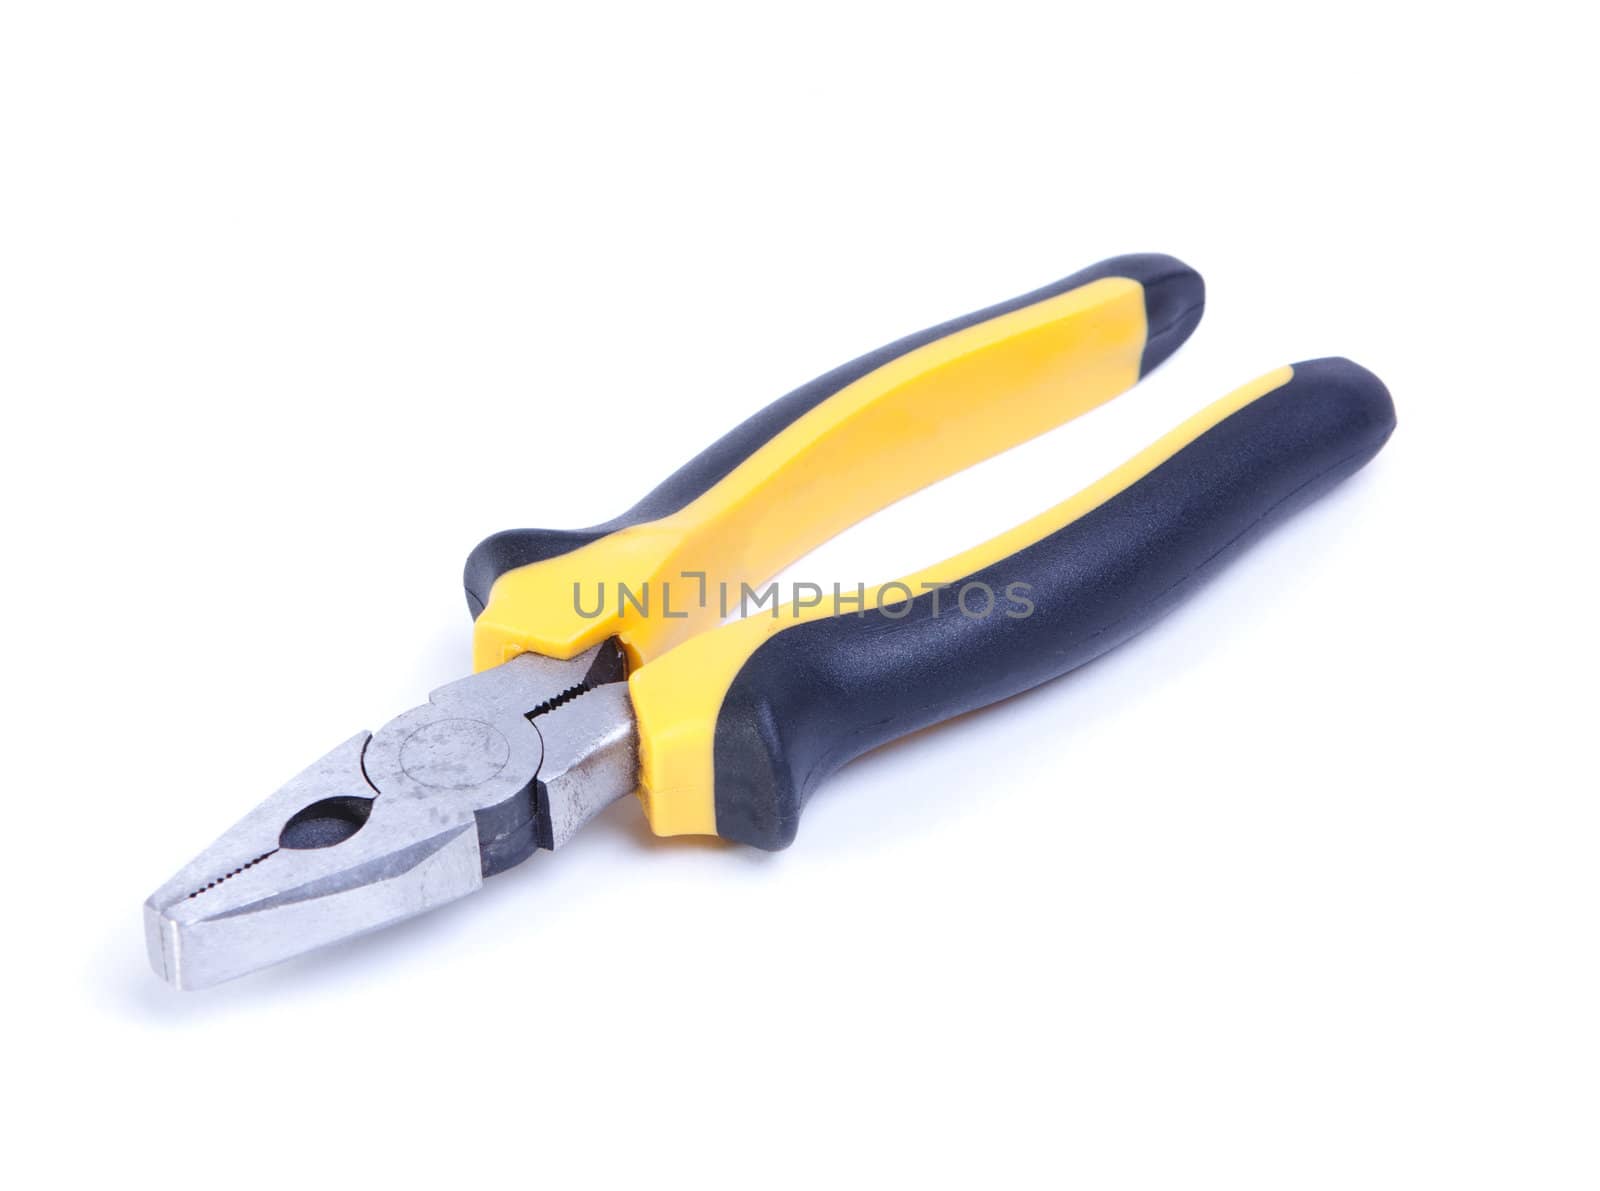 the pliers isolated on the white background